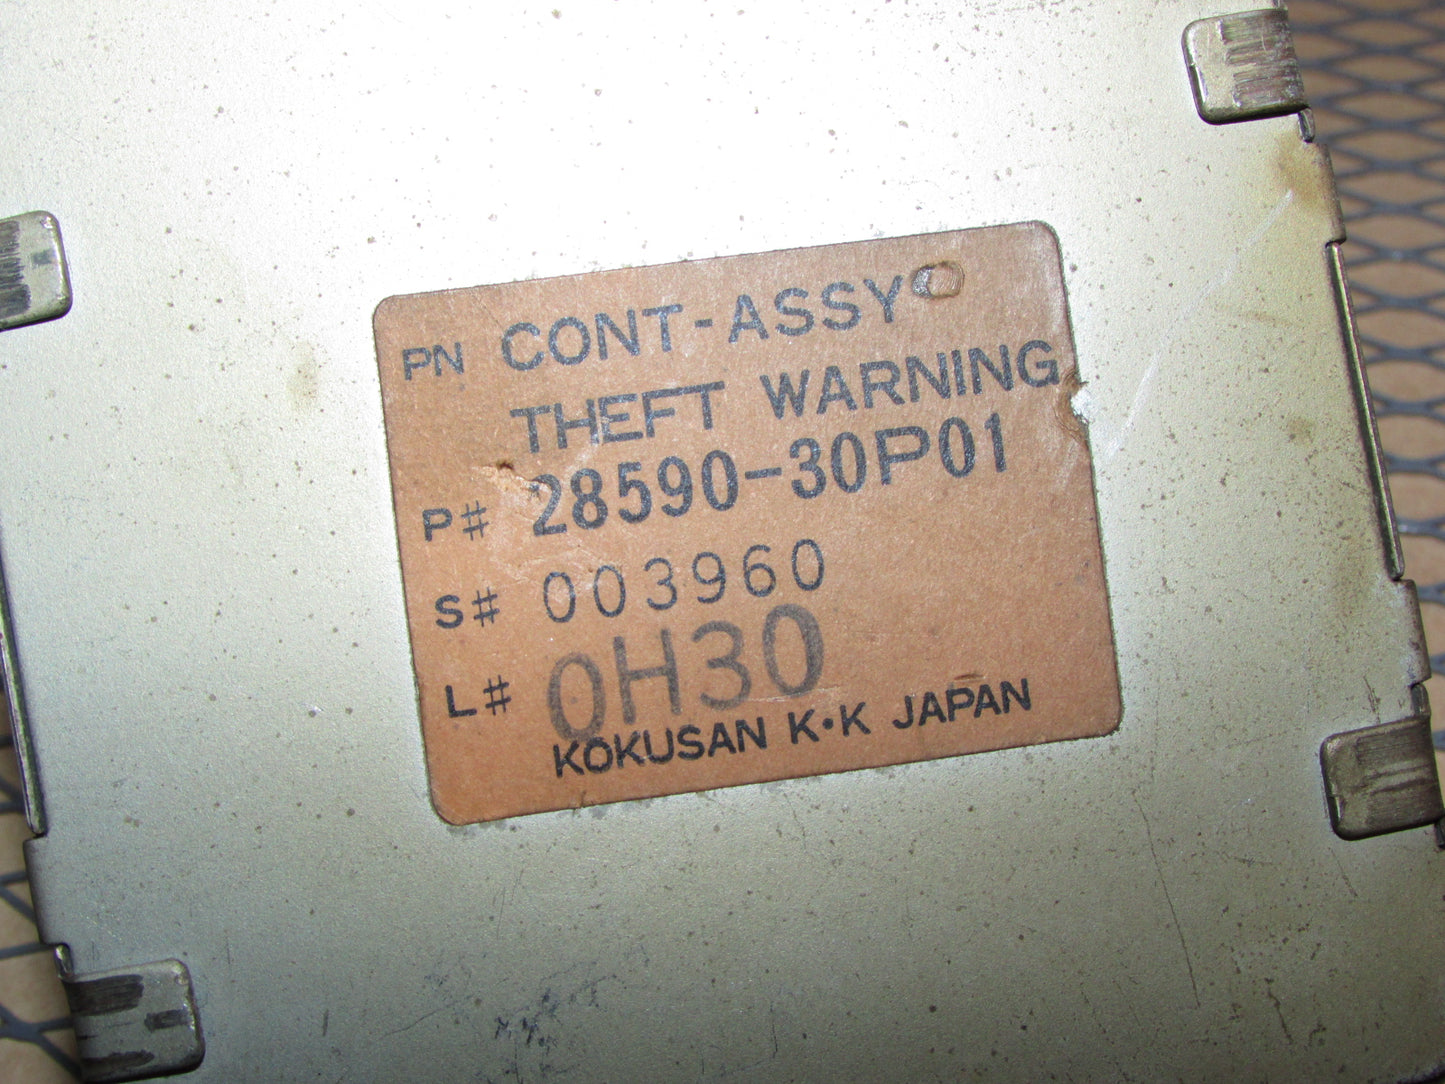 91 92 93 94 95 96 Nissan 300zx OEM Cont Assy Theft Warning Module 28590-30P01